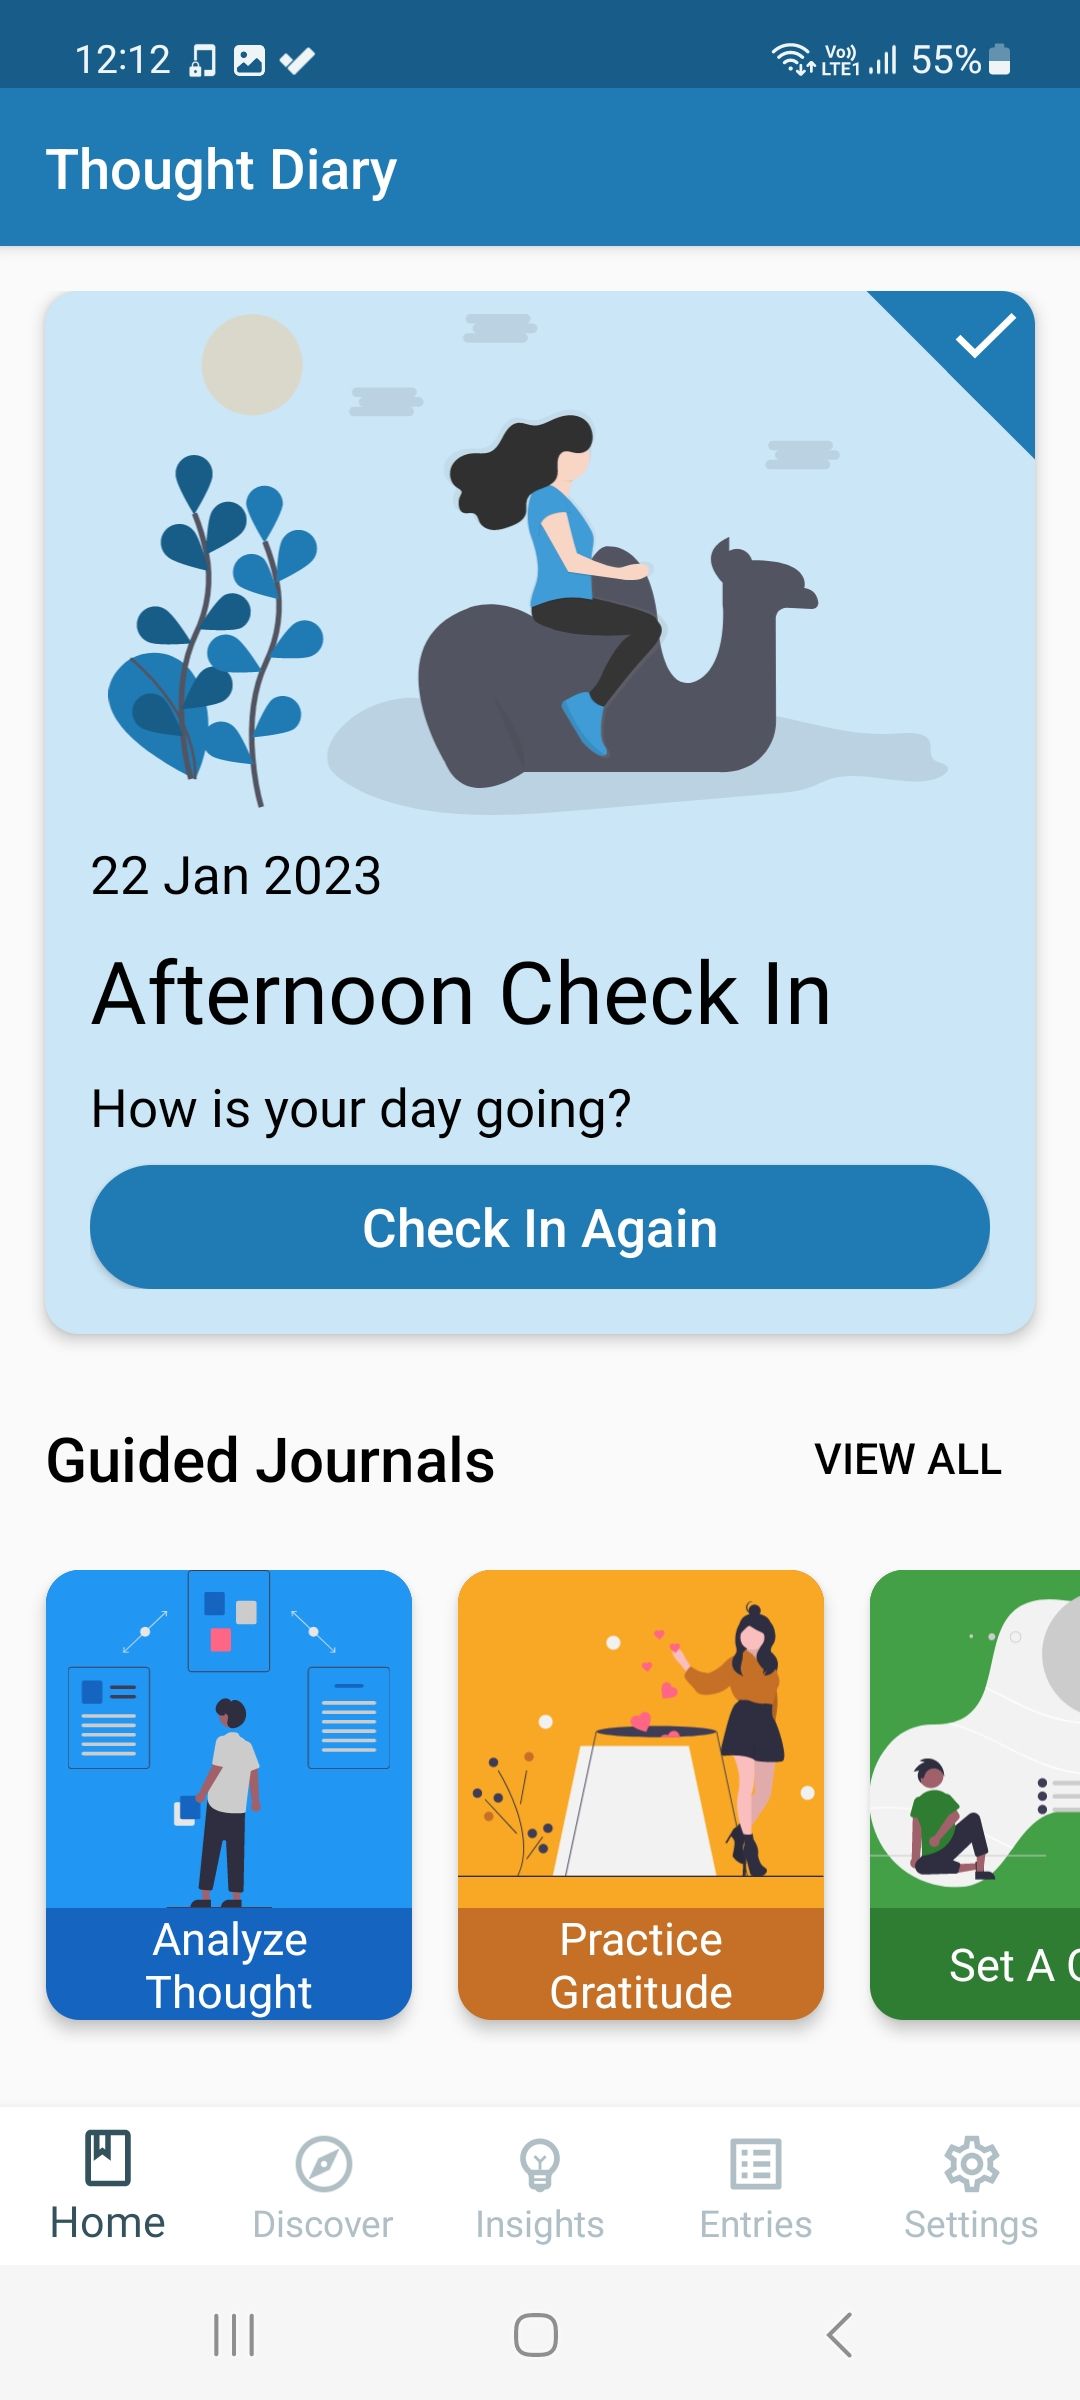 afternoon check in display on CBT thought diary